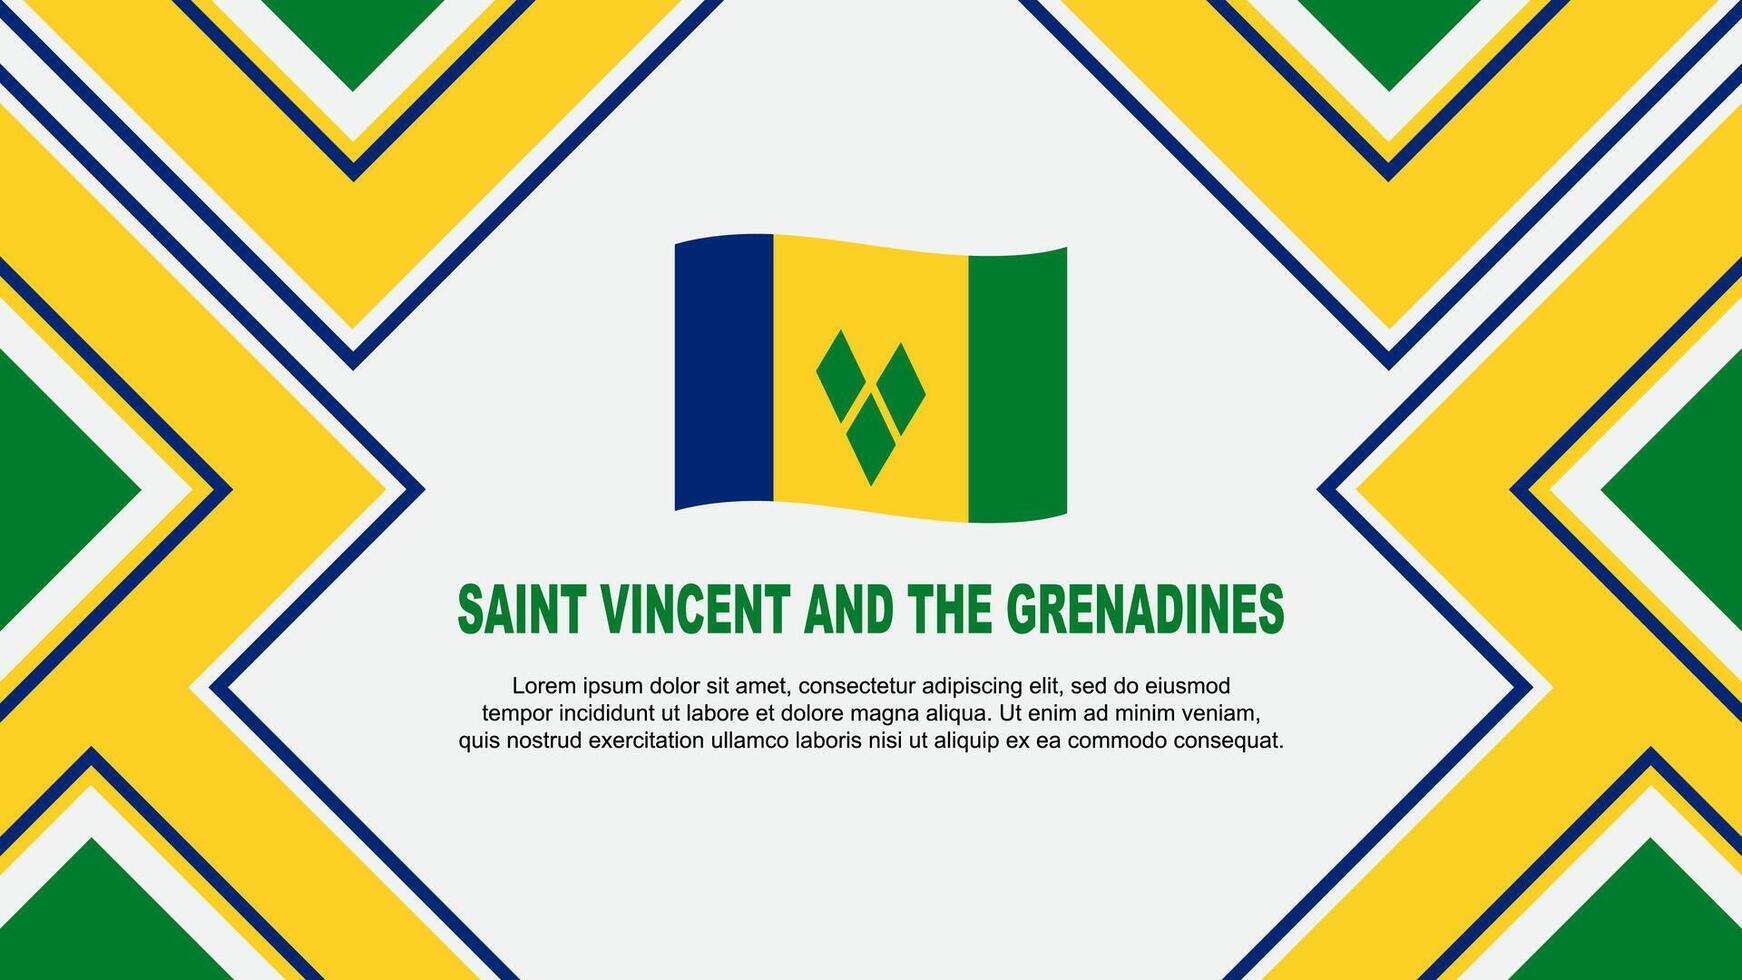 Saint Vincent And The Grenadines Flag Abstract Background Design Template. Saint Vincent And The Grenadines Independence Day Banner Wallpaper Vector Illustration. Vector